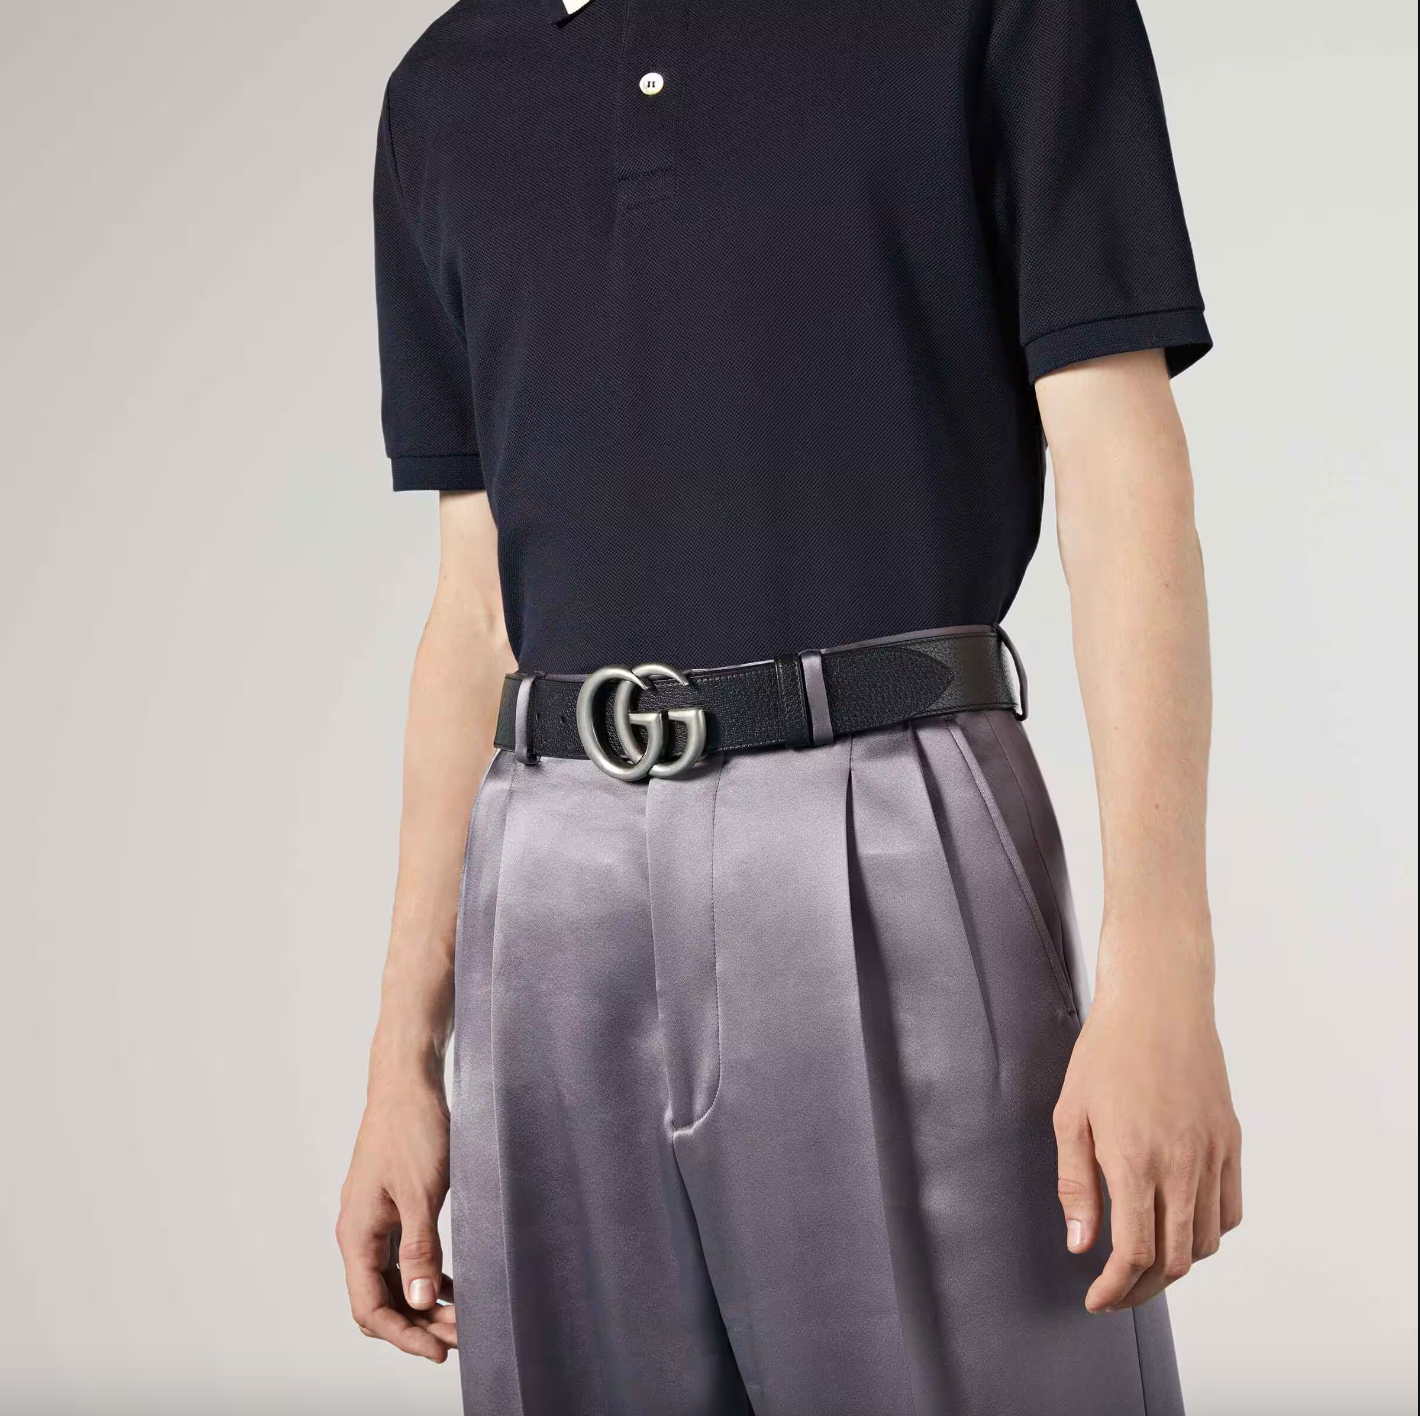 GG Marmont leather belt with shiny buckle